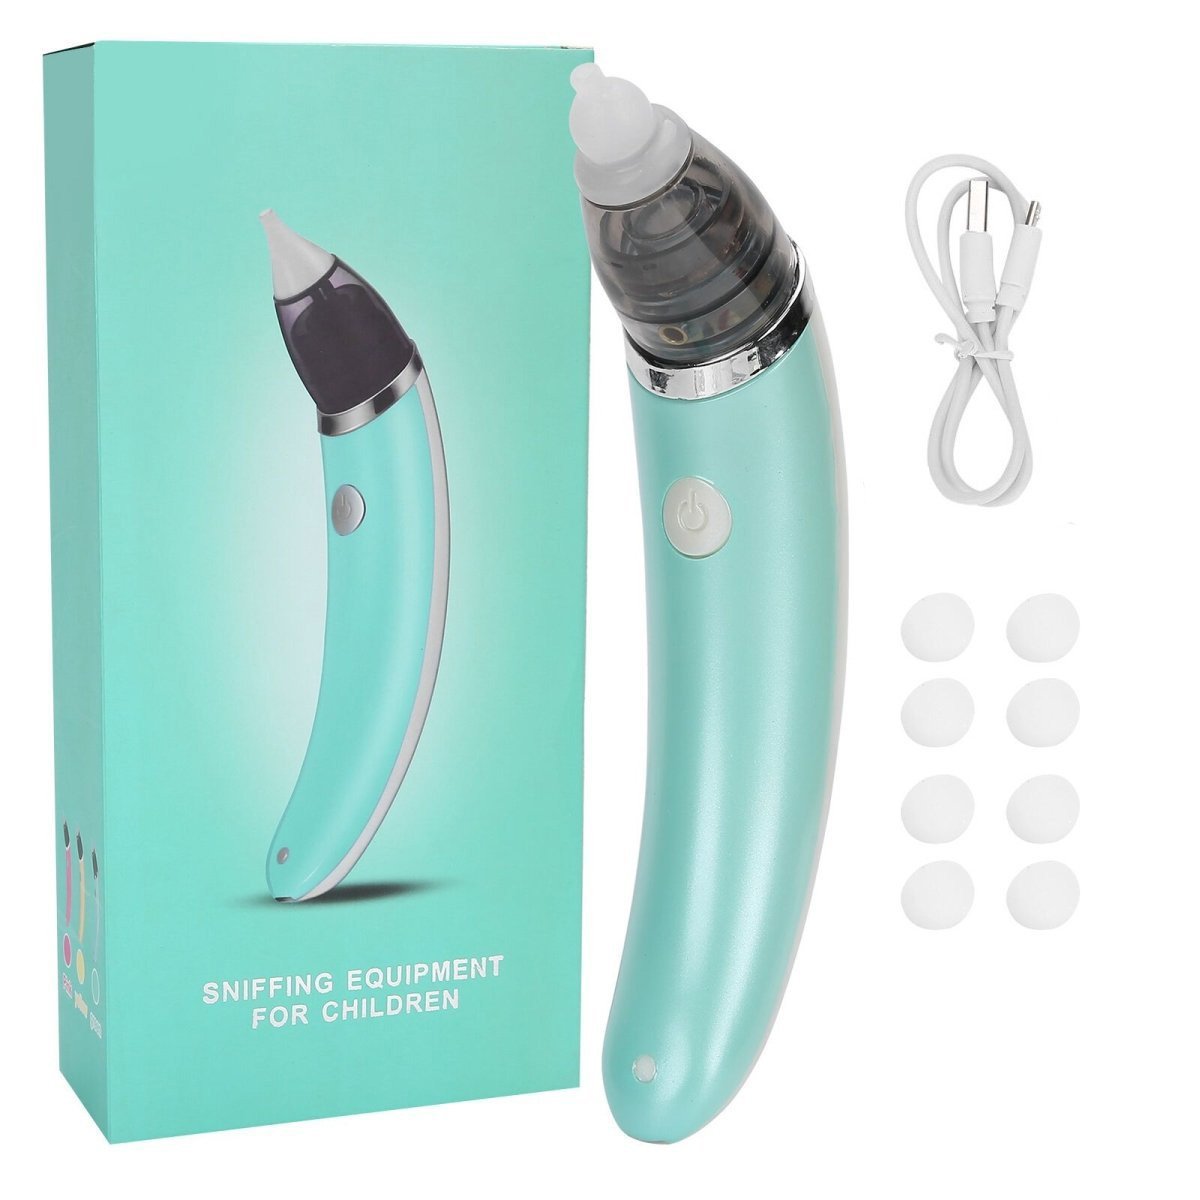 Rechargeable Baby Nasal Aspirator Electric Safe Hygienic Nose Cleaner For  Infant